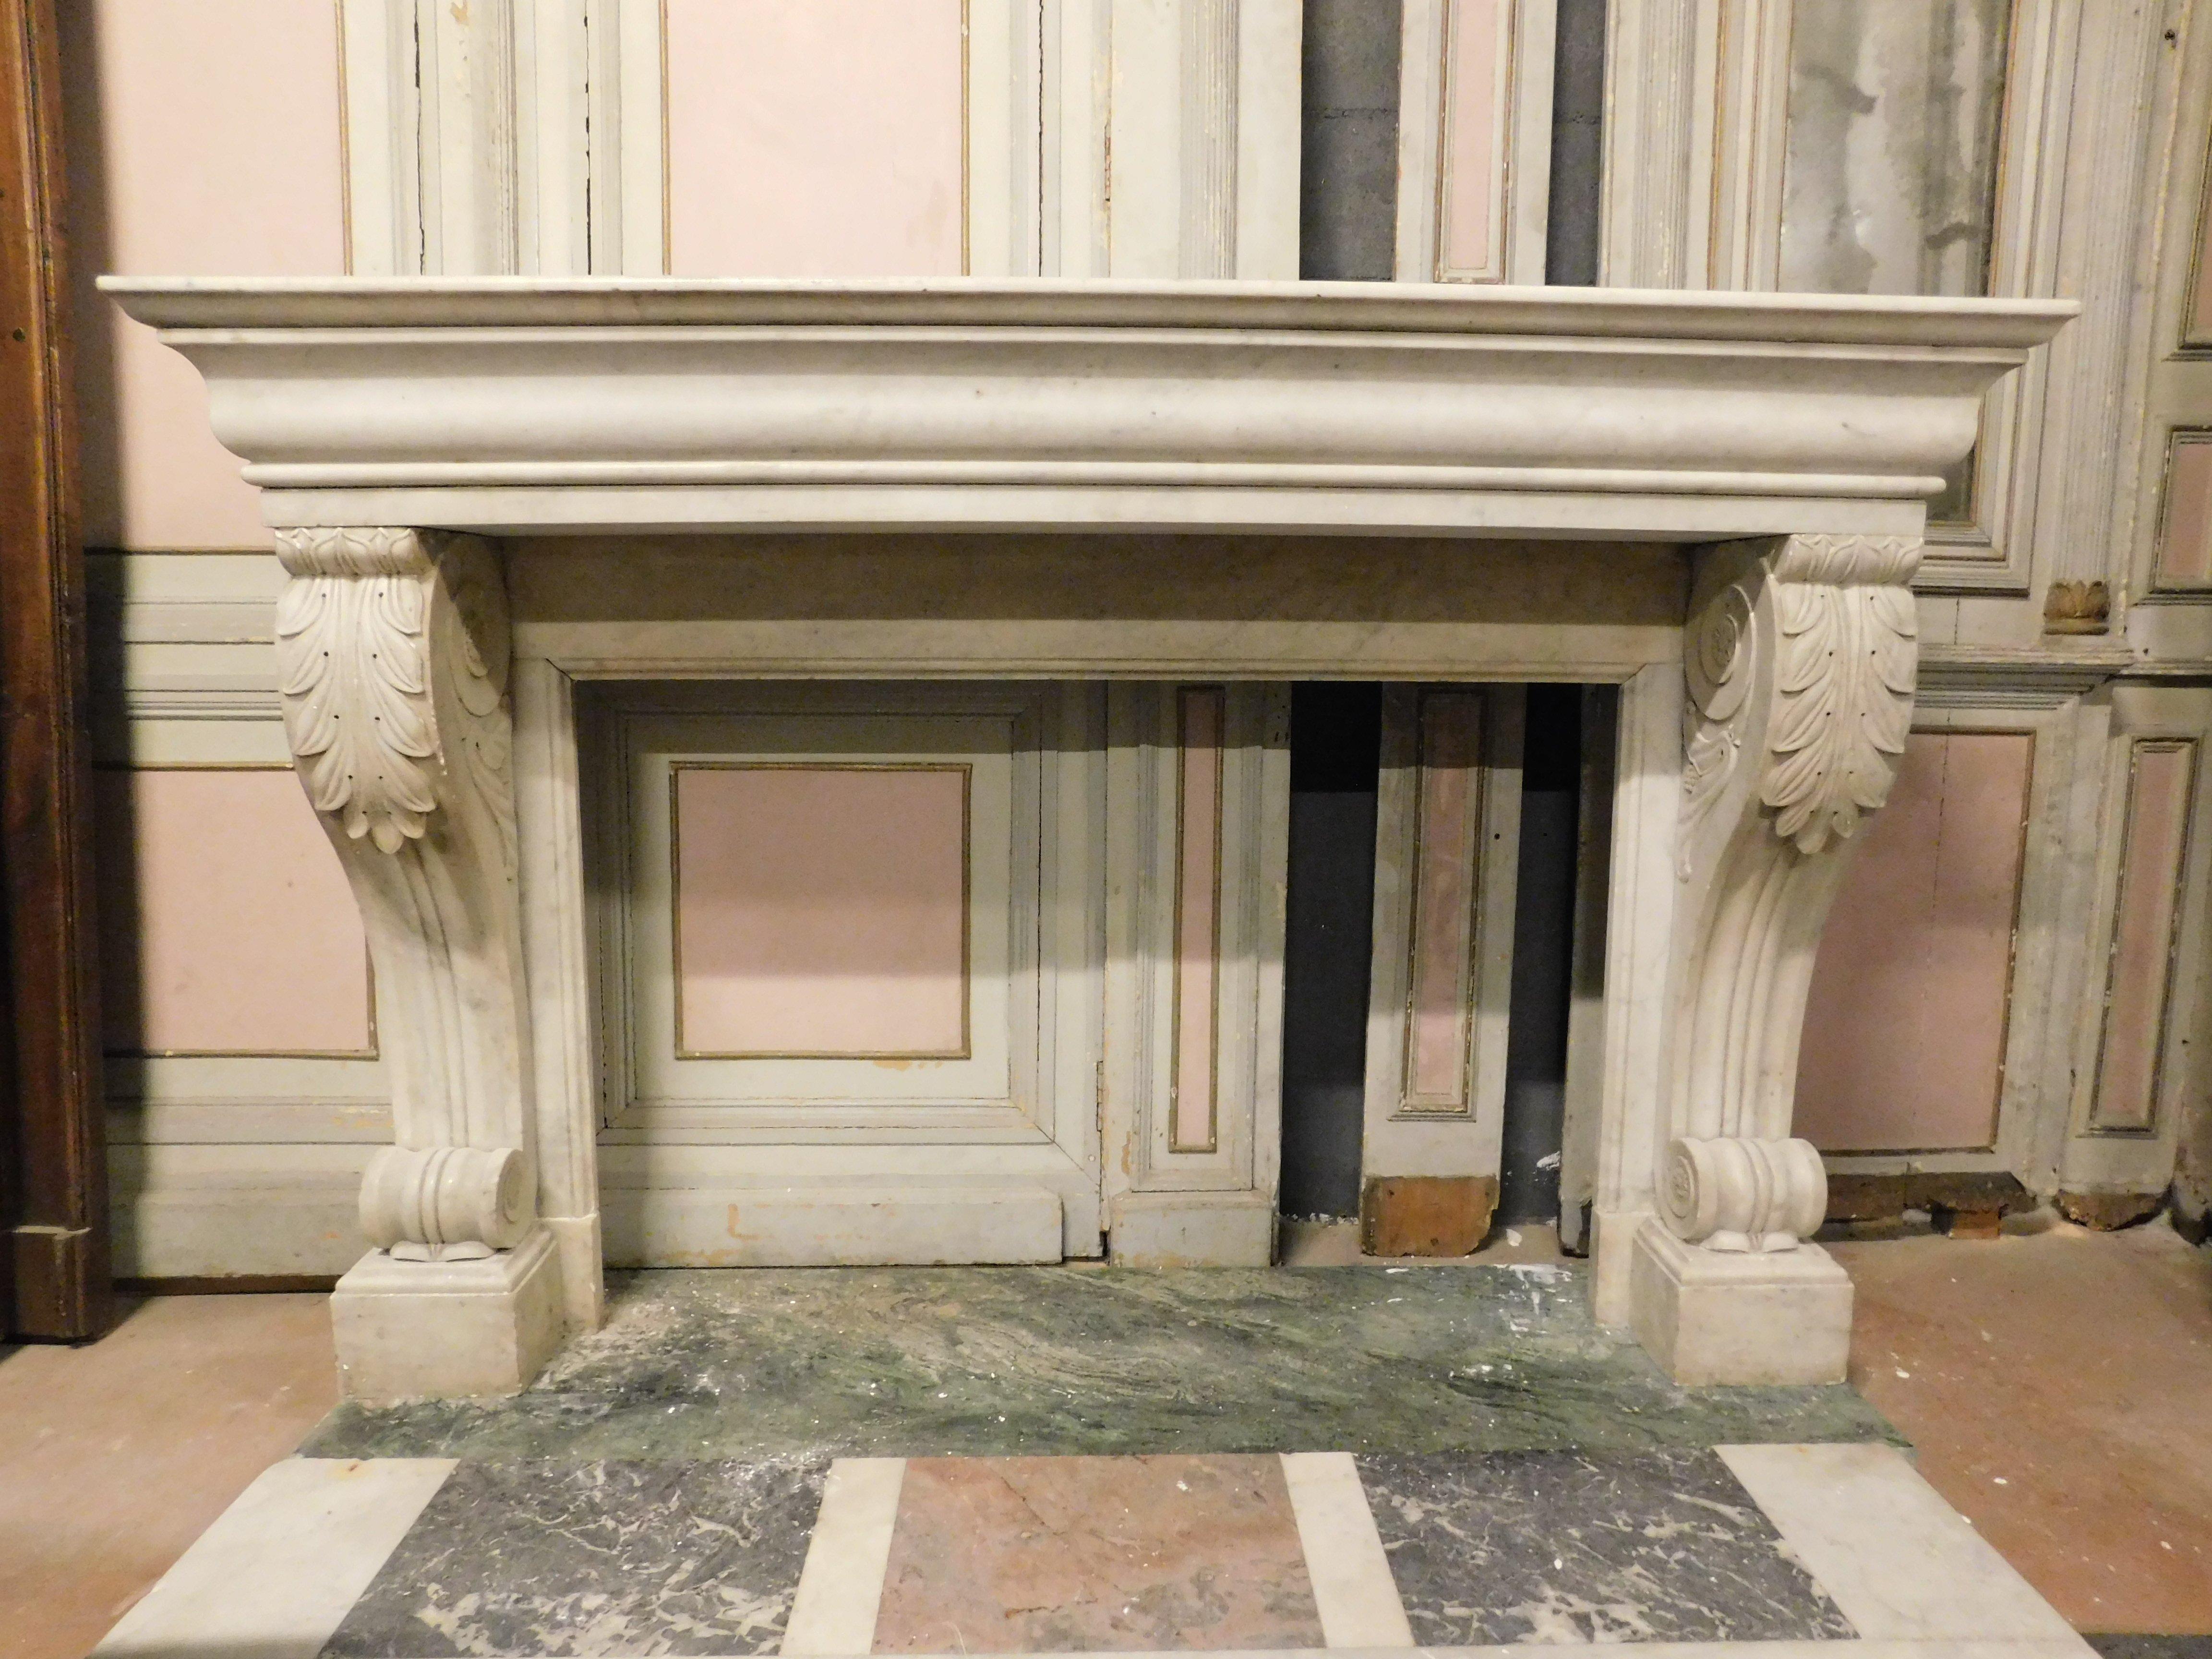 Ancient and precious fireplace mantle, hand-sculpted in white Carrara marble, enriched with acanthus leaf-sculpted legs, coming from France from the 18th/19th century.
Beautiful and elegant, it will give refinement and charm to your warm corner of